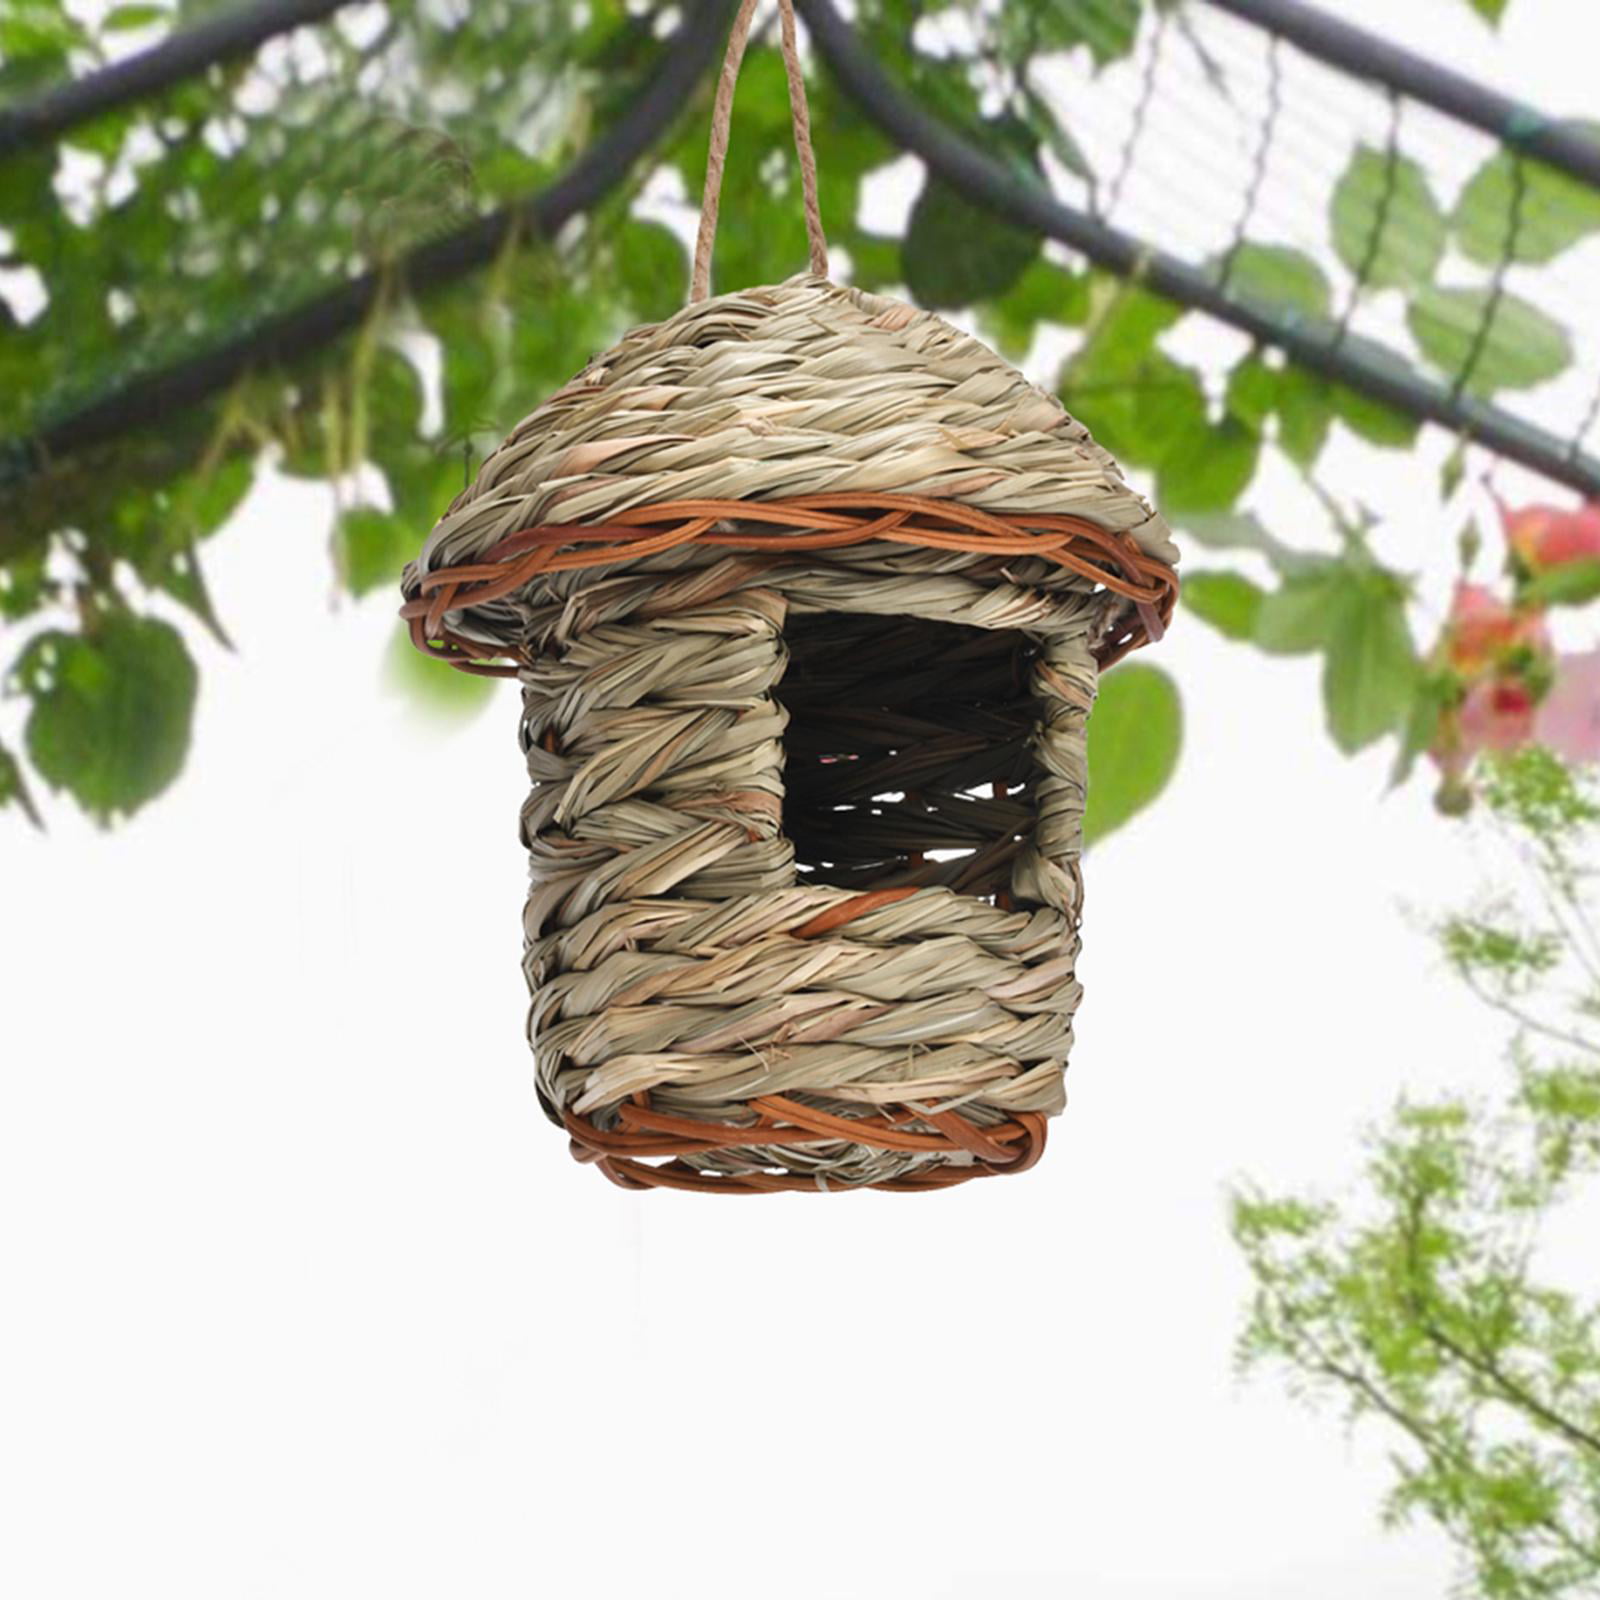 Jainsons Pet Products® Bird Nest for Outside, Resting Place for